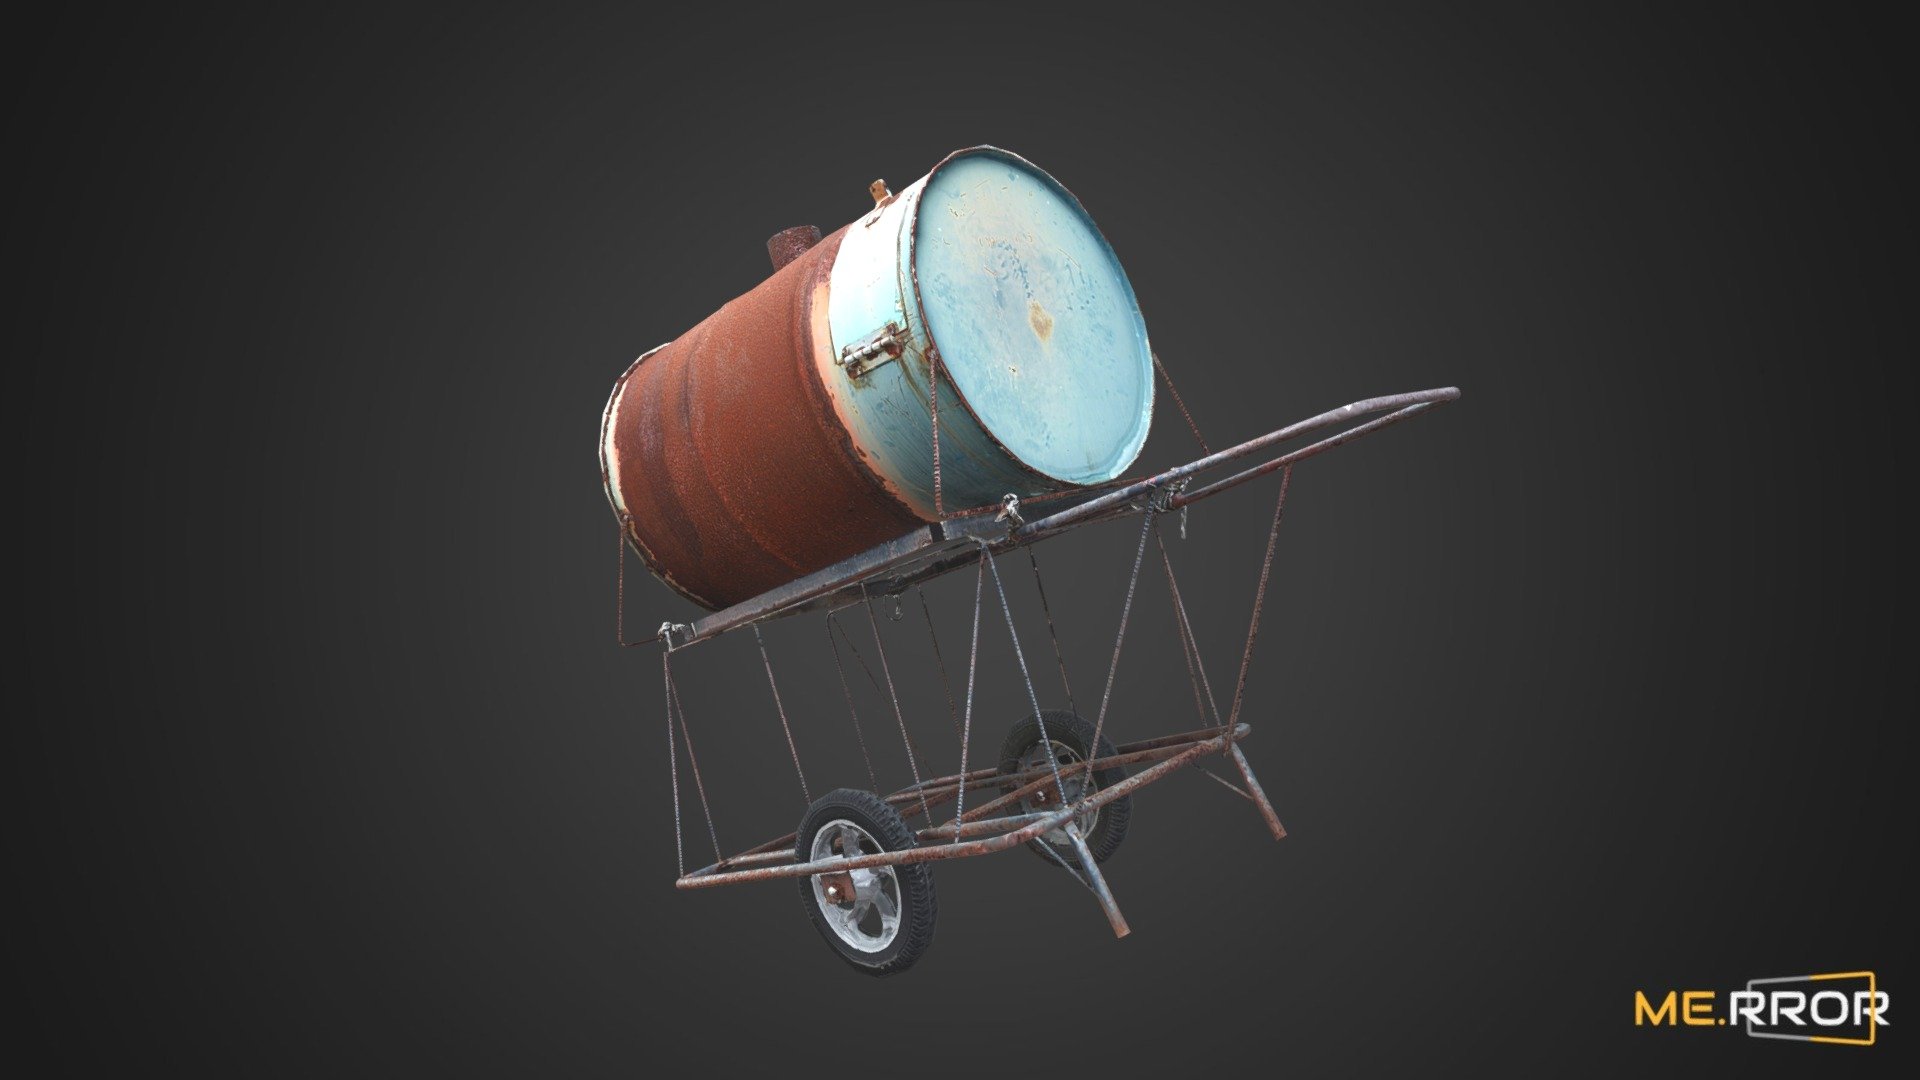 MERROR is a 3D Content PLATFORM which introduces various Asian assets to the 3D world


3DScanning #Photogrametry #ME.RROR - [Game-Ready] Rusty Drumcan Cart - Buy Royalty Free 3D model by ME.RROR (@merror) 3d model